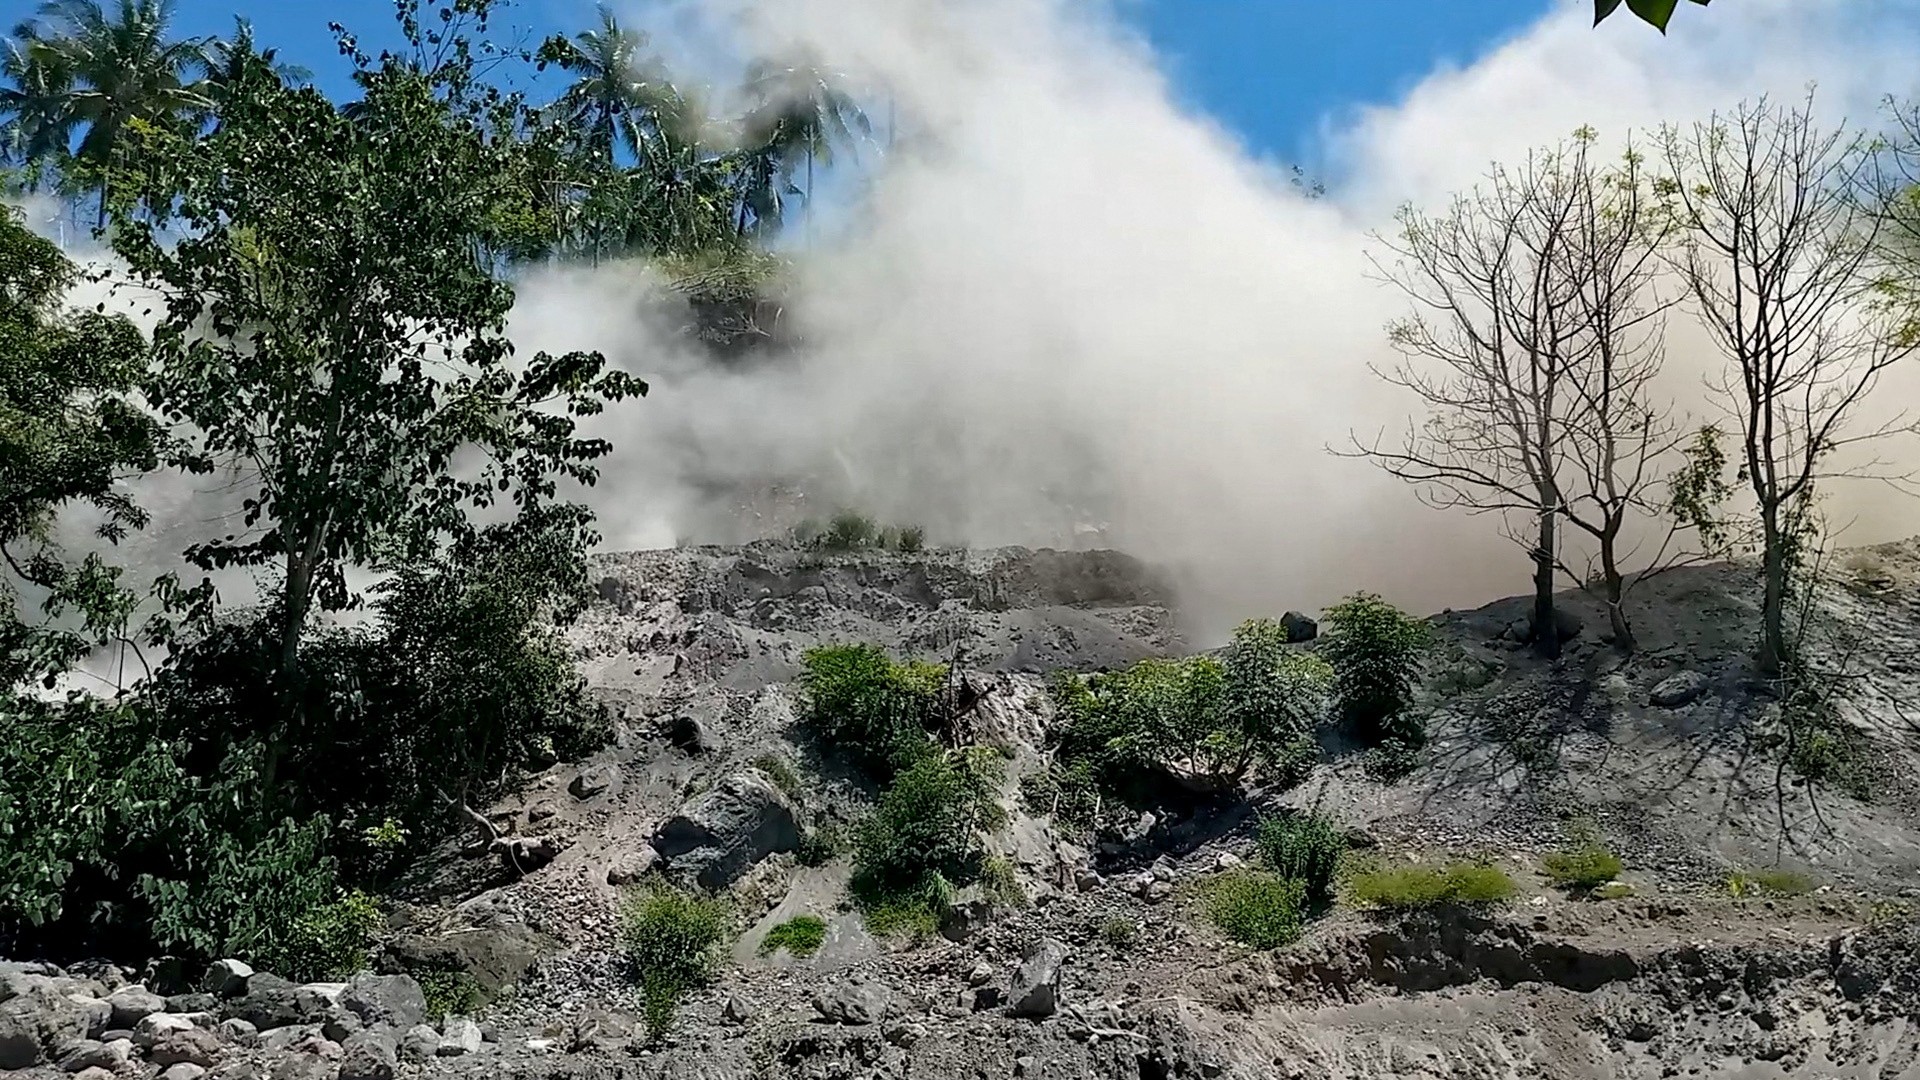 A still image from a social media video shows dust disturbances on side of hill after an earthquake in Nagekeo, Indonesia